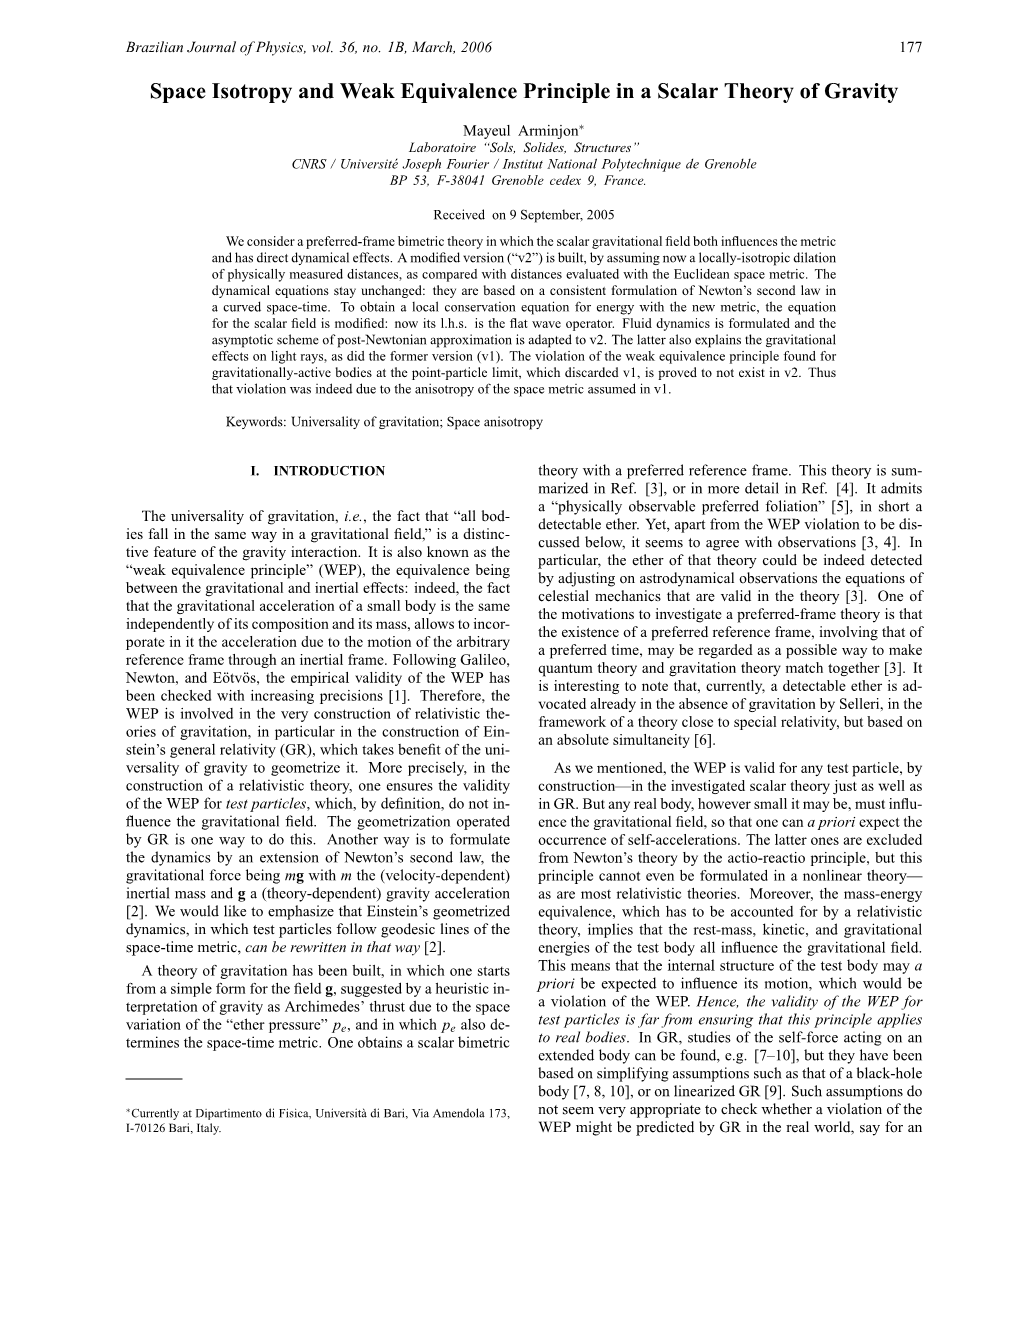 Space Isotropy and Weak Equivalence Principle in a Scalar Theory of Gravity